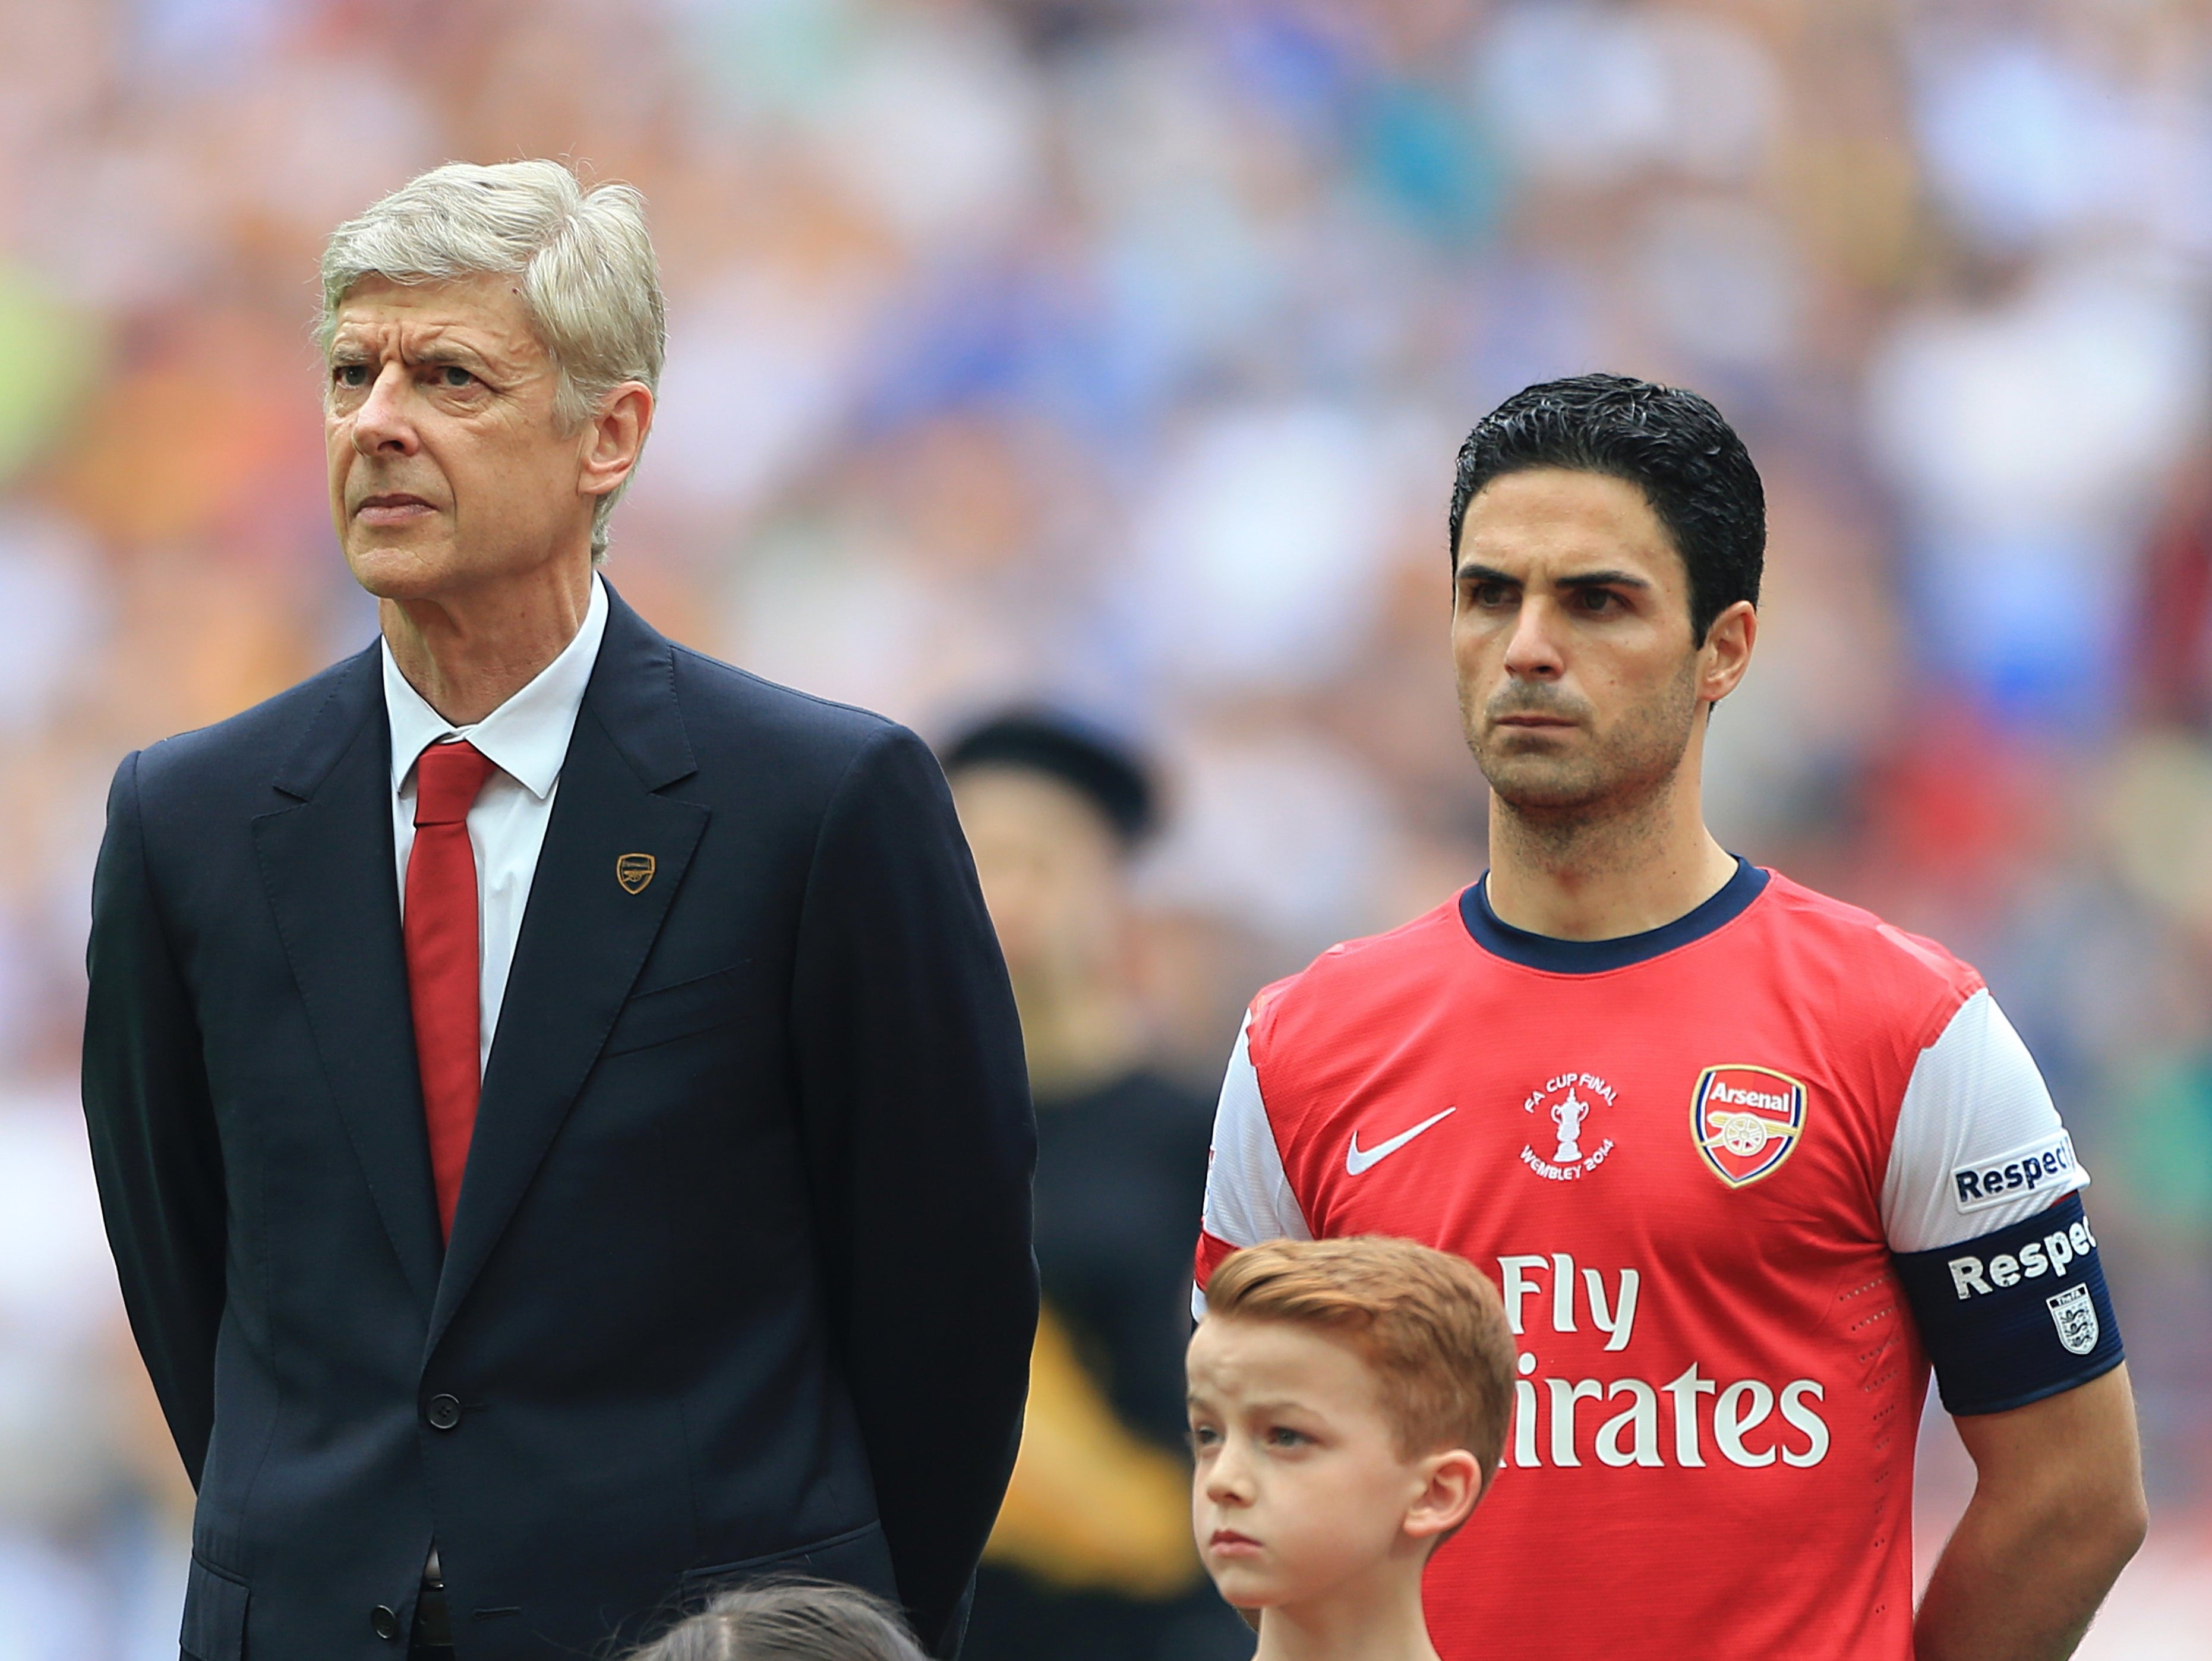 Current Arsenal manager Mikel Arteta (right) is keen to link up with former boss Arsene Wenger once again